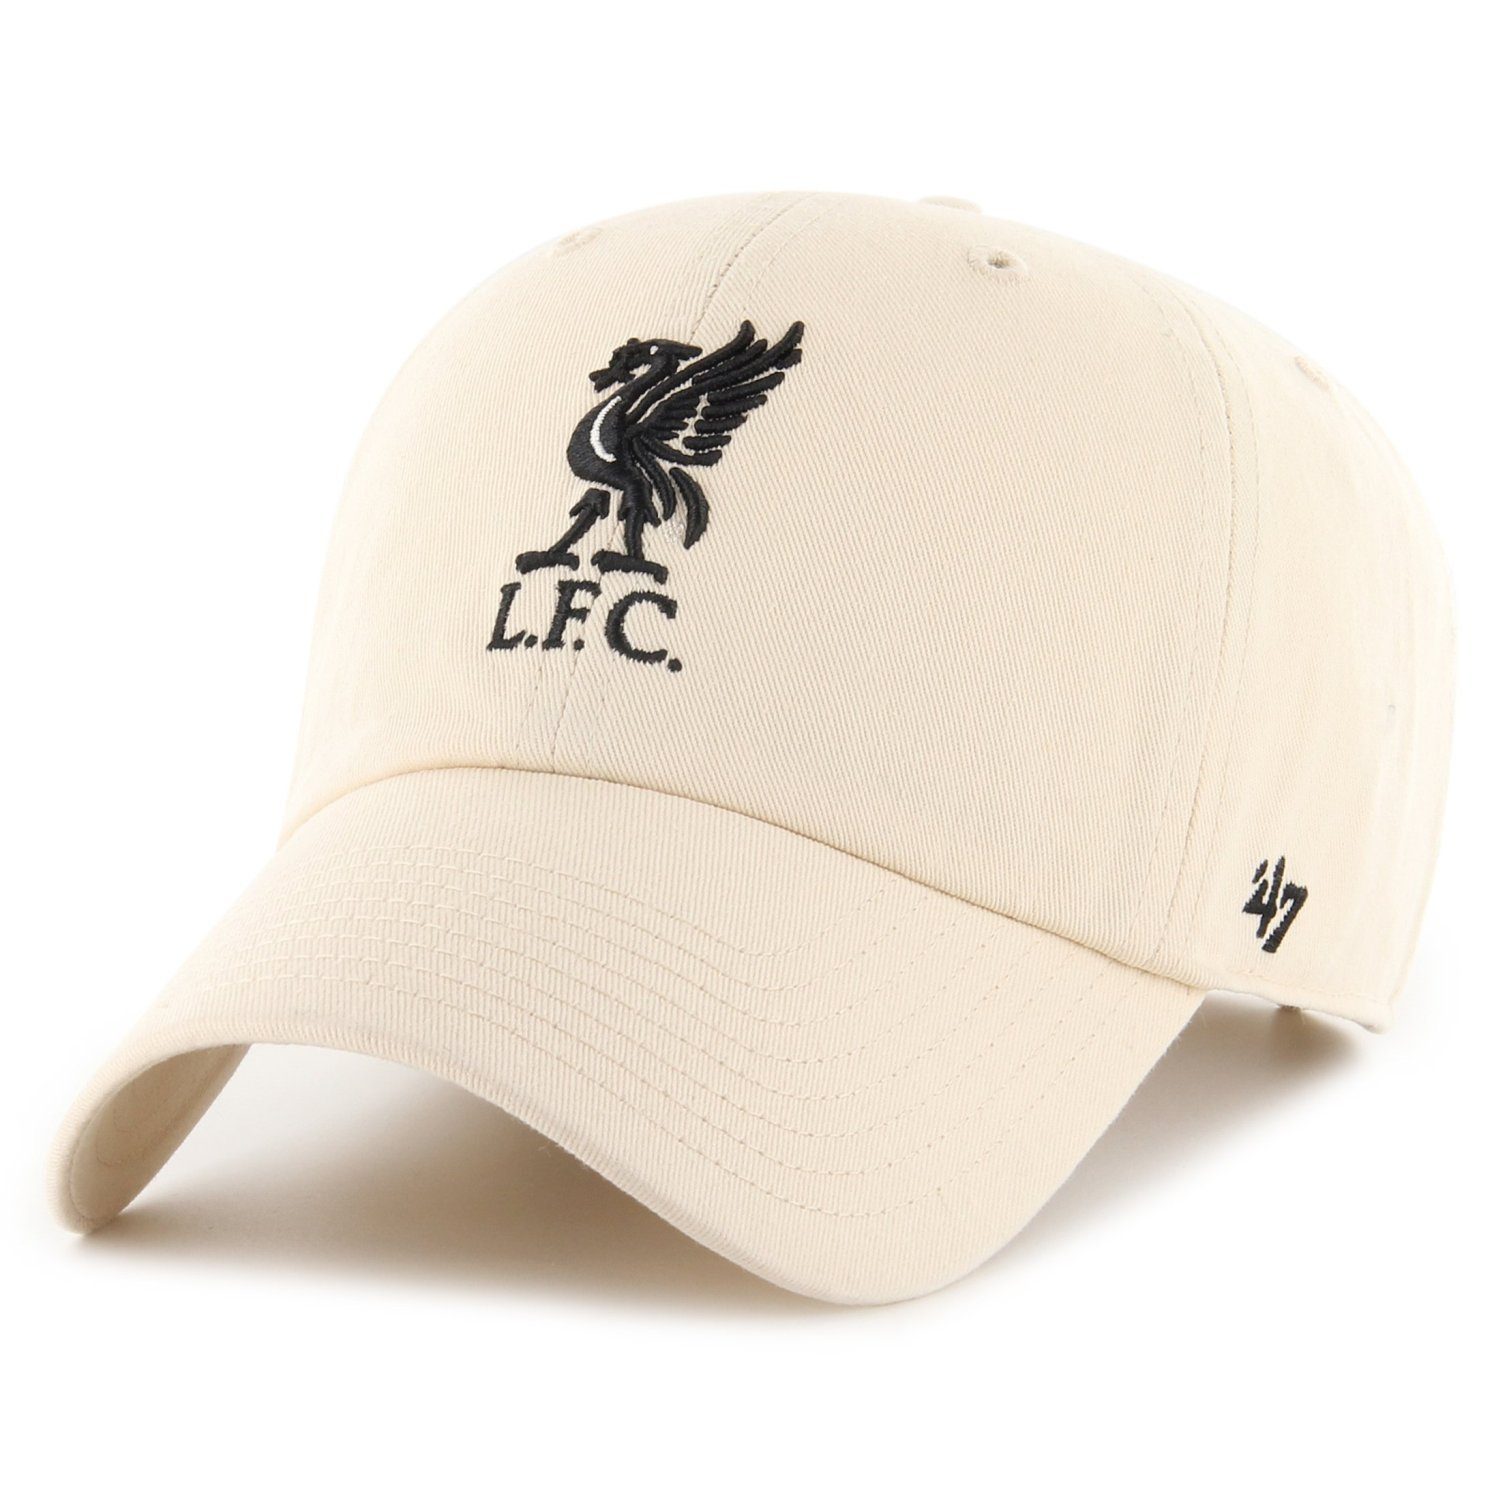 FC Cap Liverpool Trucker '47 Brand Fit Relaxed